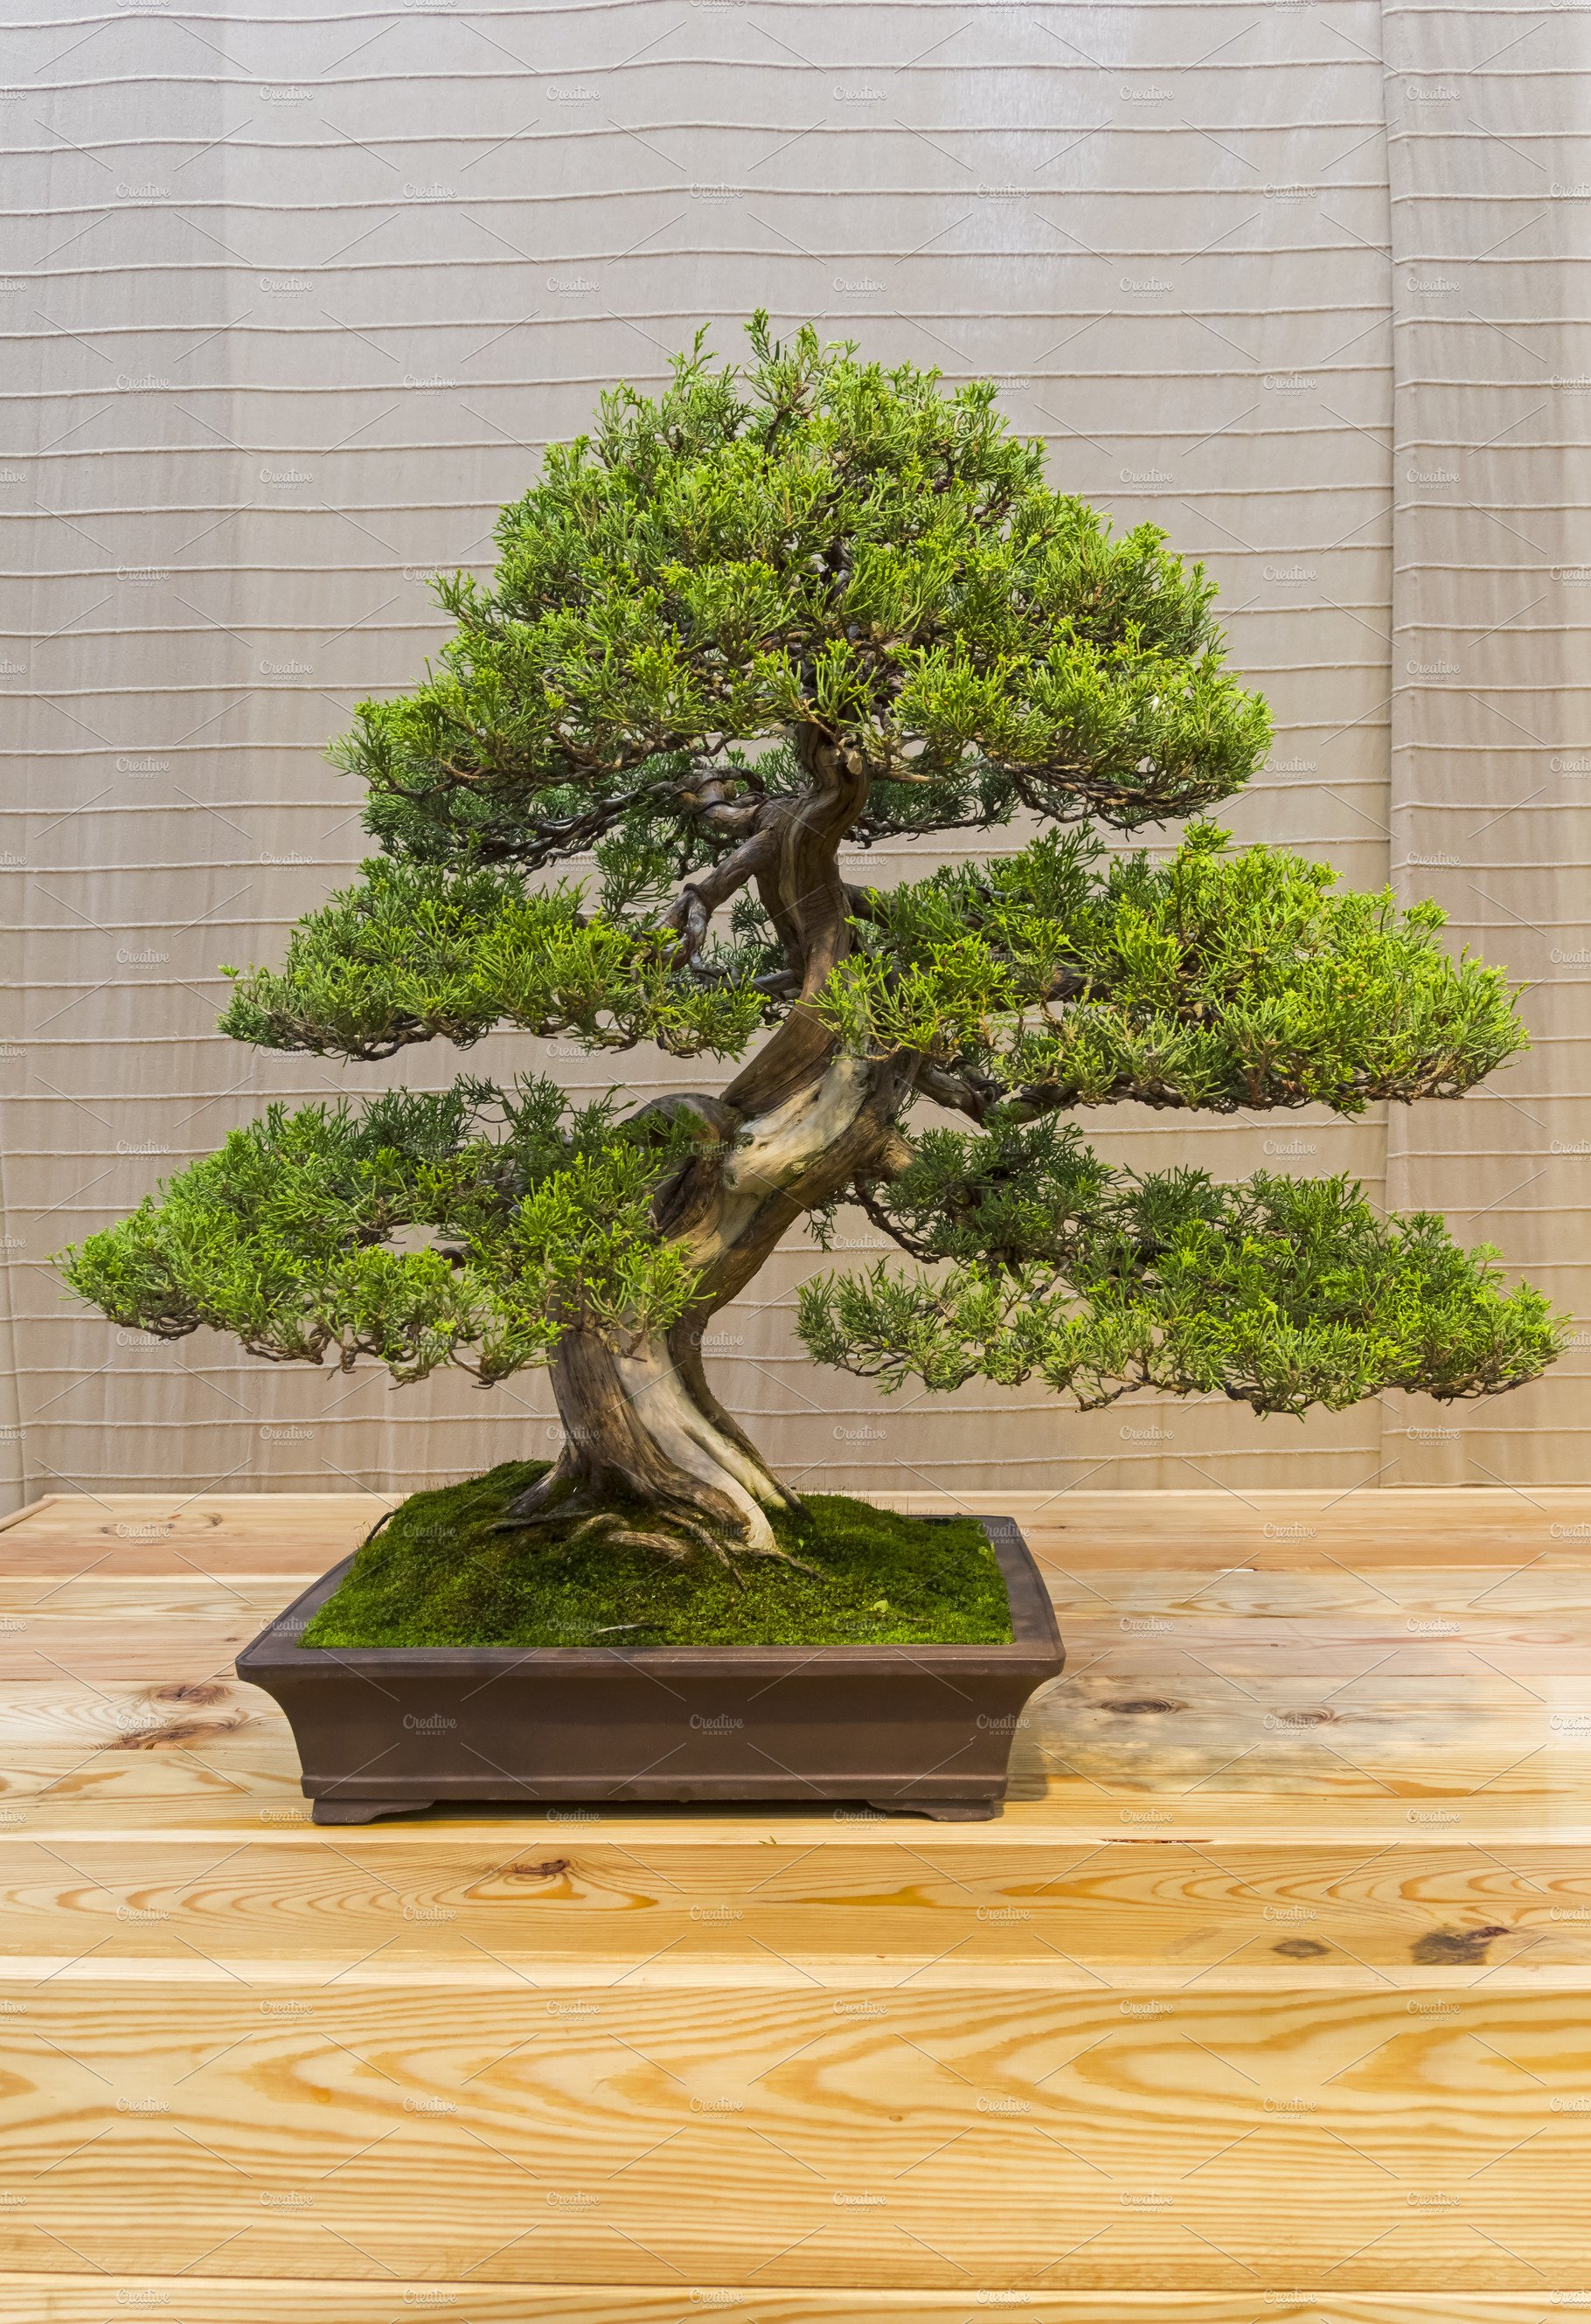 sold out - introduction to bonsai - waterfront botanical gardens